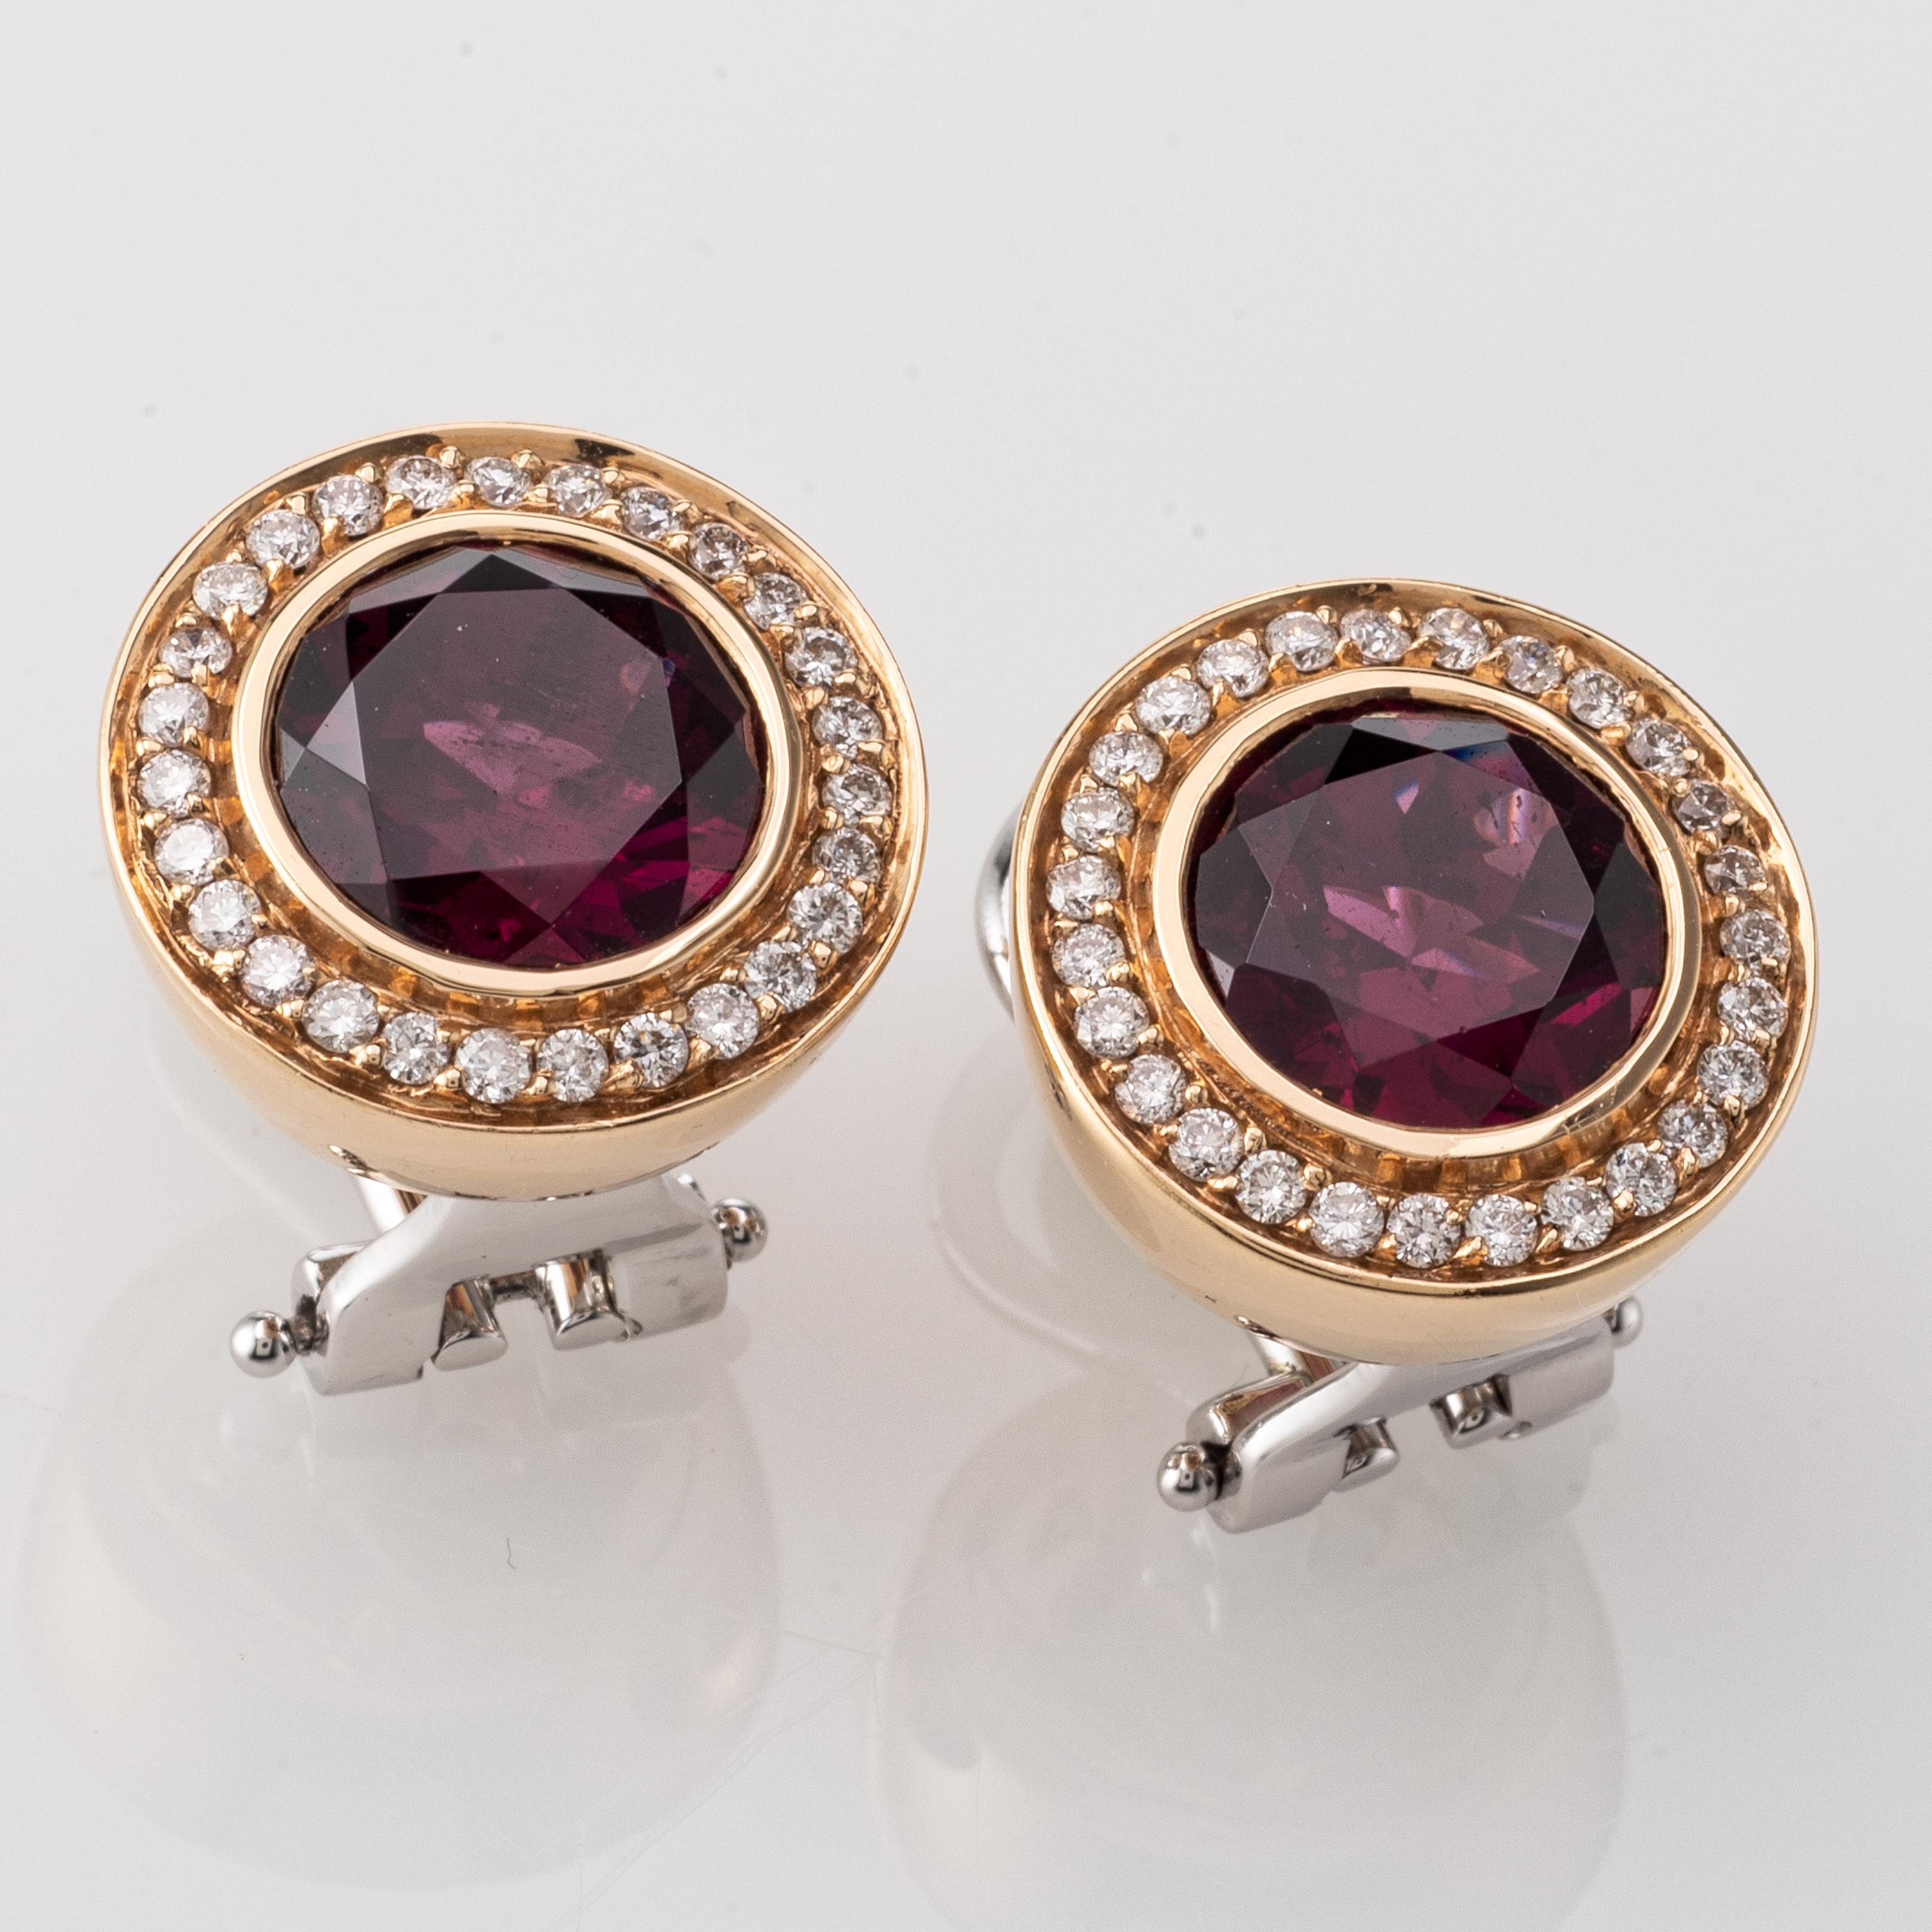 Timeless and Classy Garnet and Diamond Earrings set in 18 Karat Rose and White Gold.
4.5 Carat of Pyrope Garnet and 0.38 Carat Diamonds.
Customisation of gold colour, stones is possible. We can custom make this item according to your taste. When